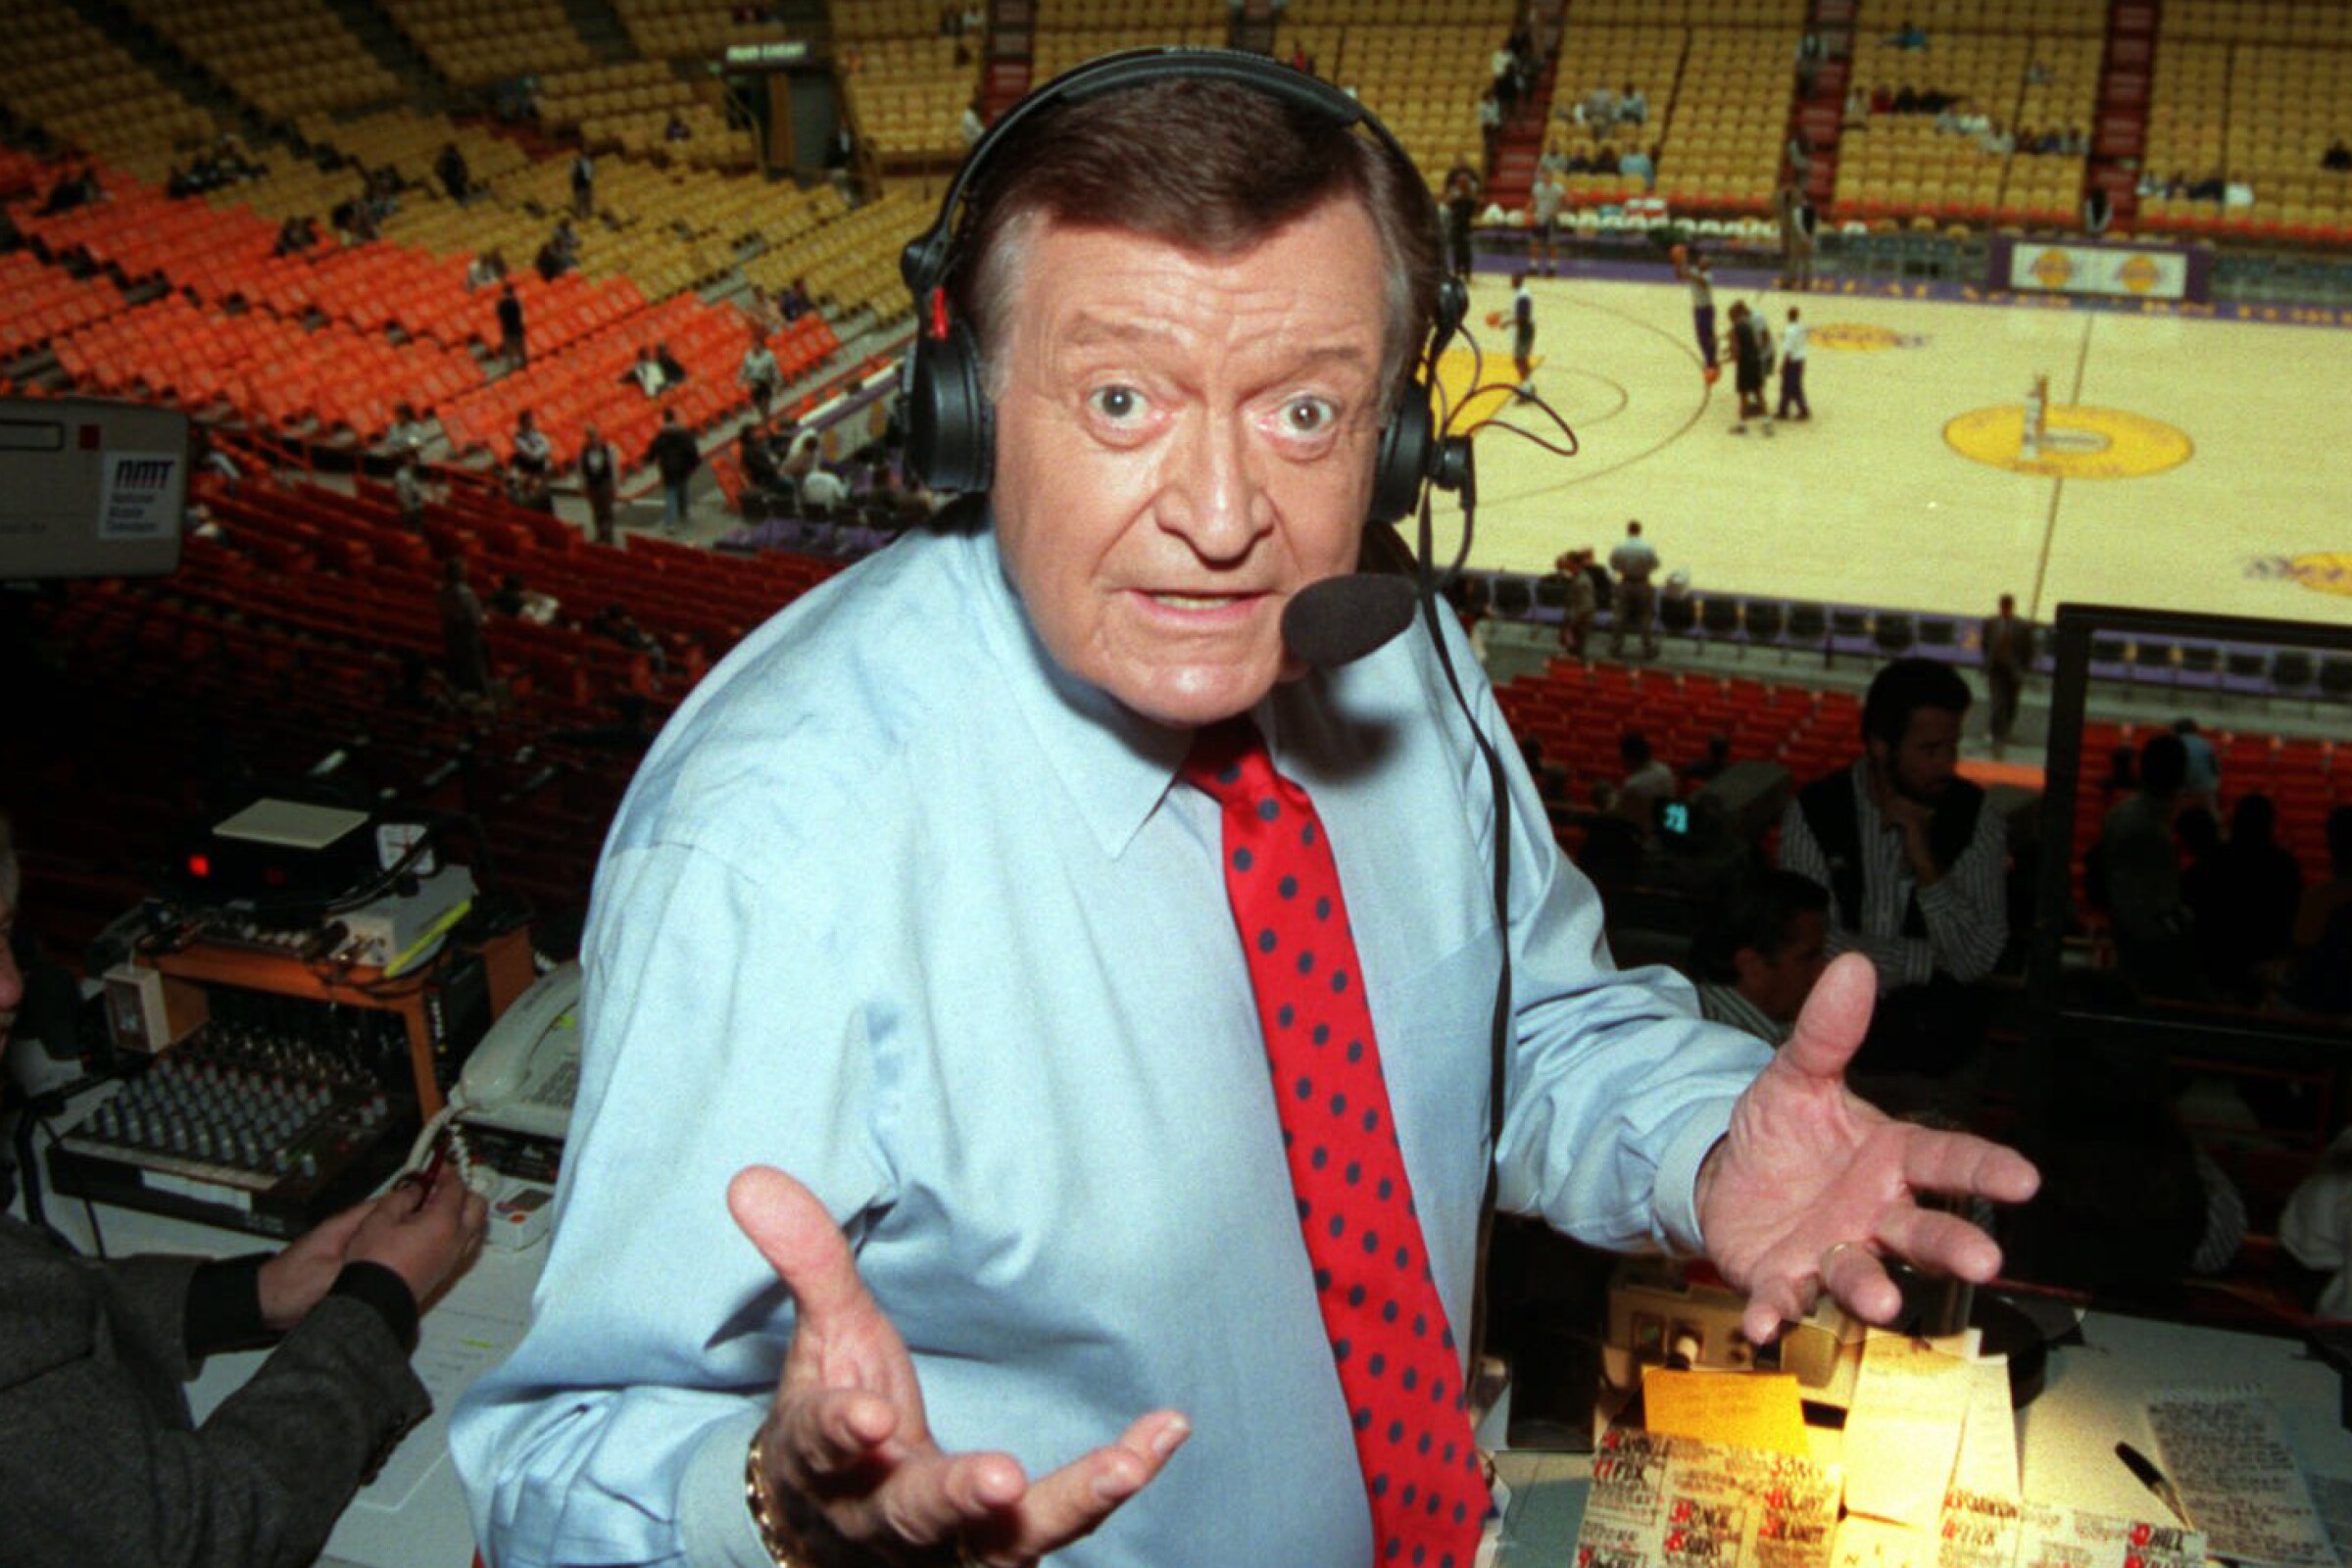 It's time to bring back at least one of Chick Hearn's "Chickisms."